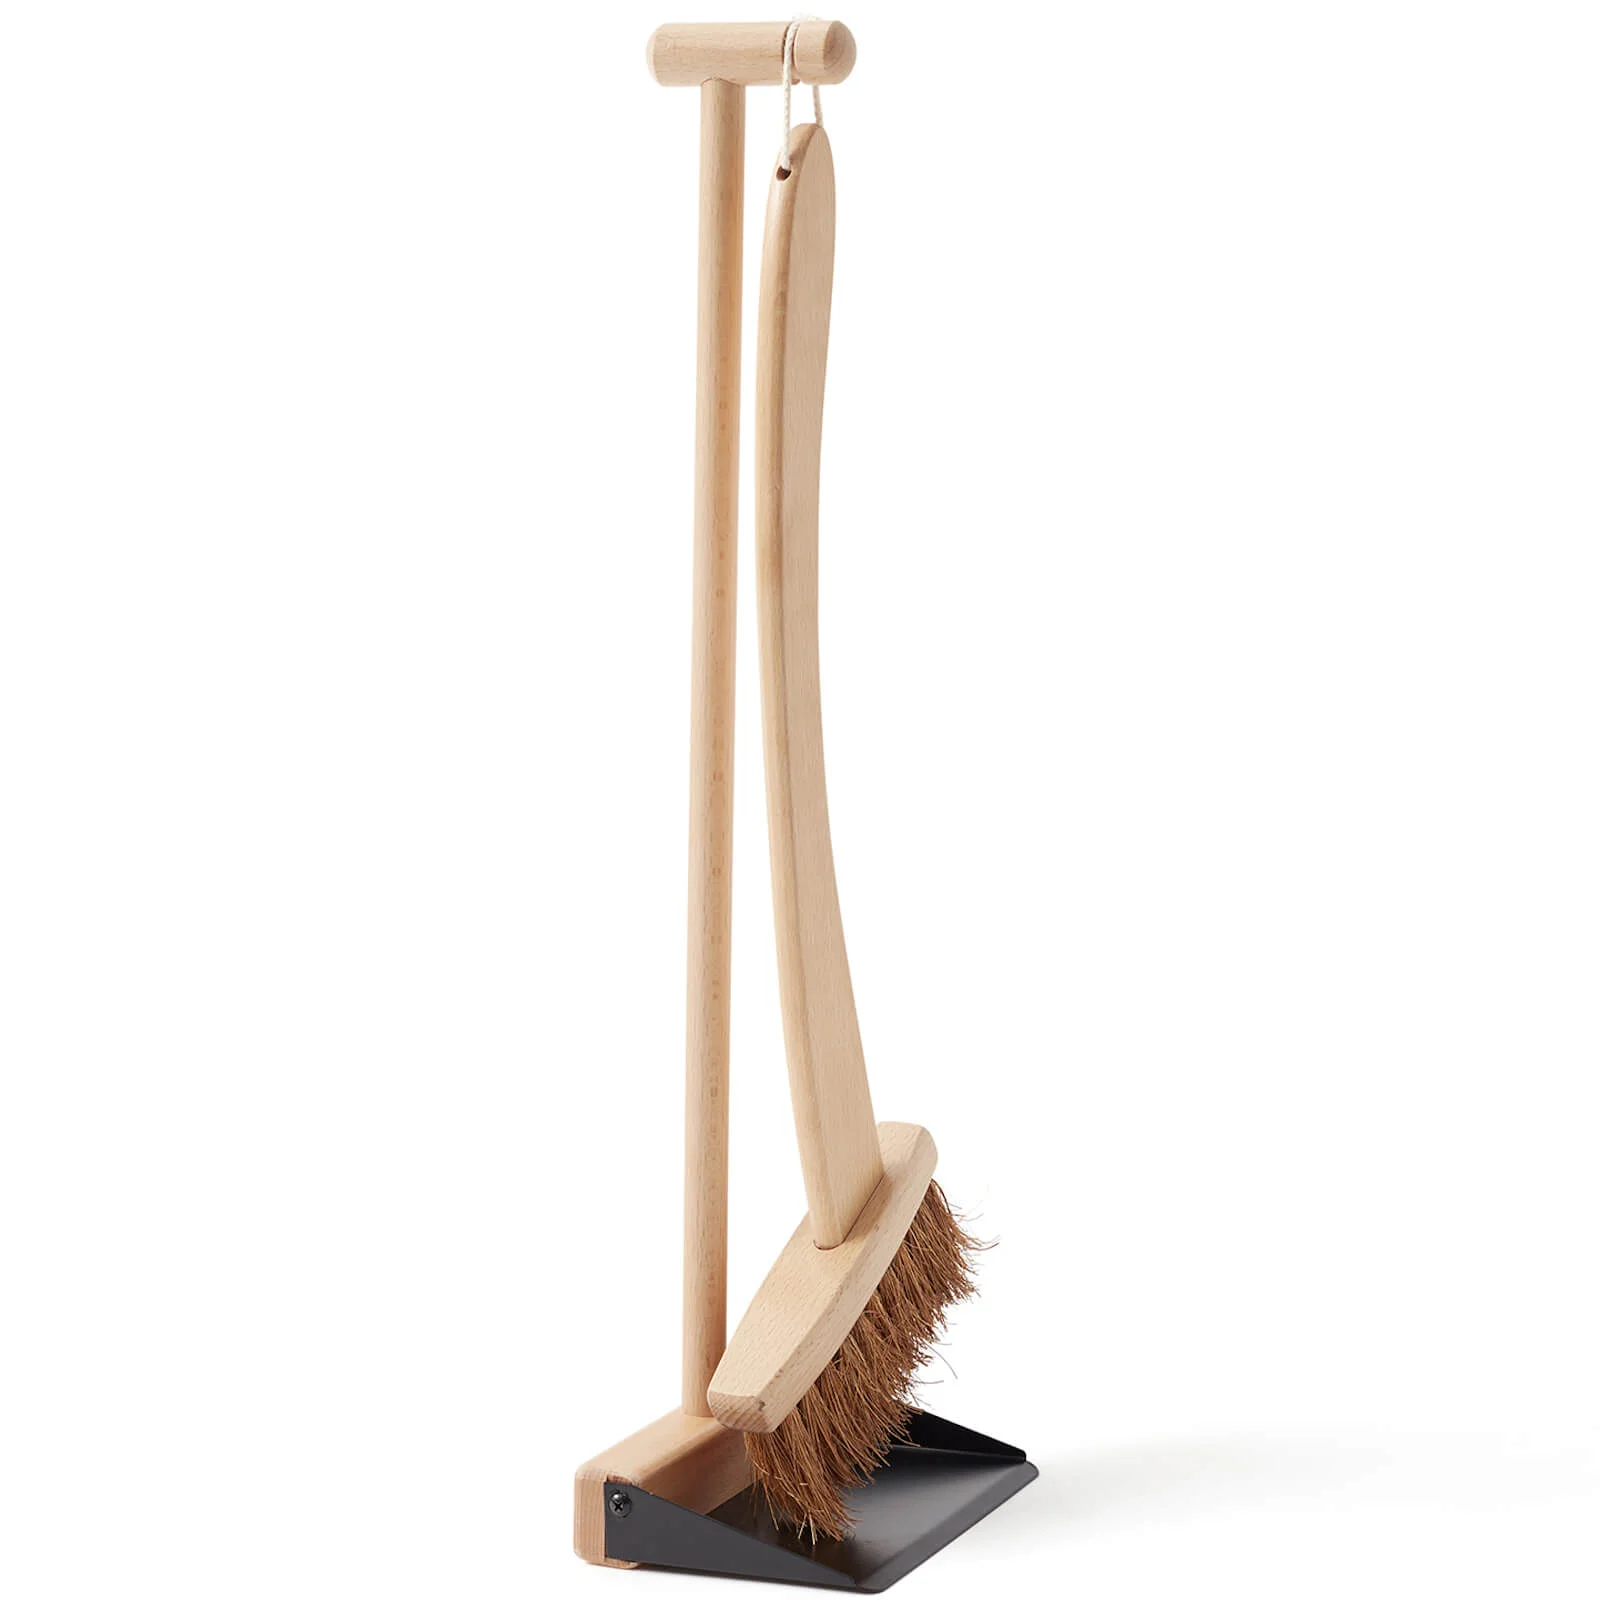 Kids Concept Brush and Dustpan Image 1